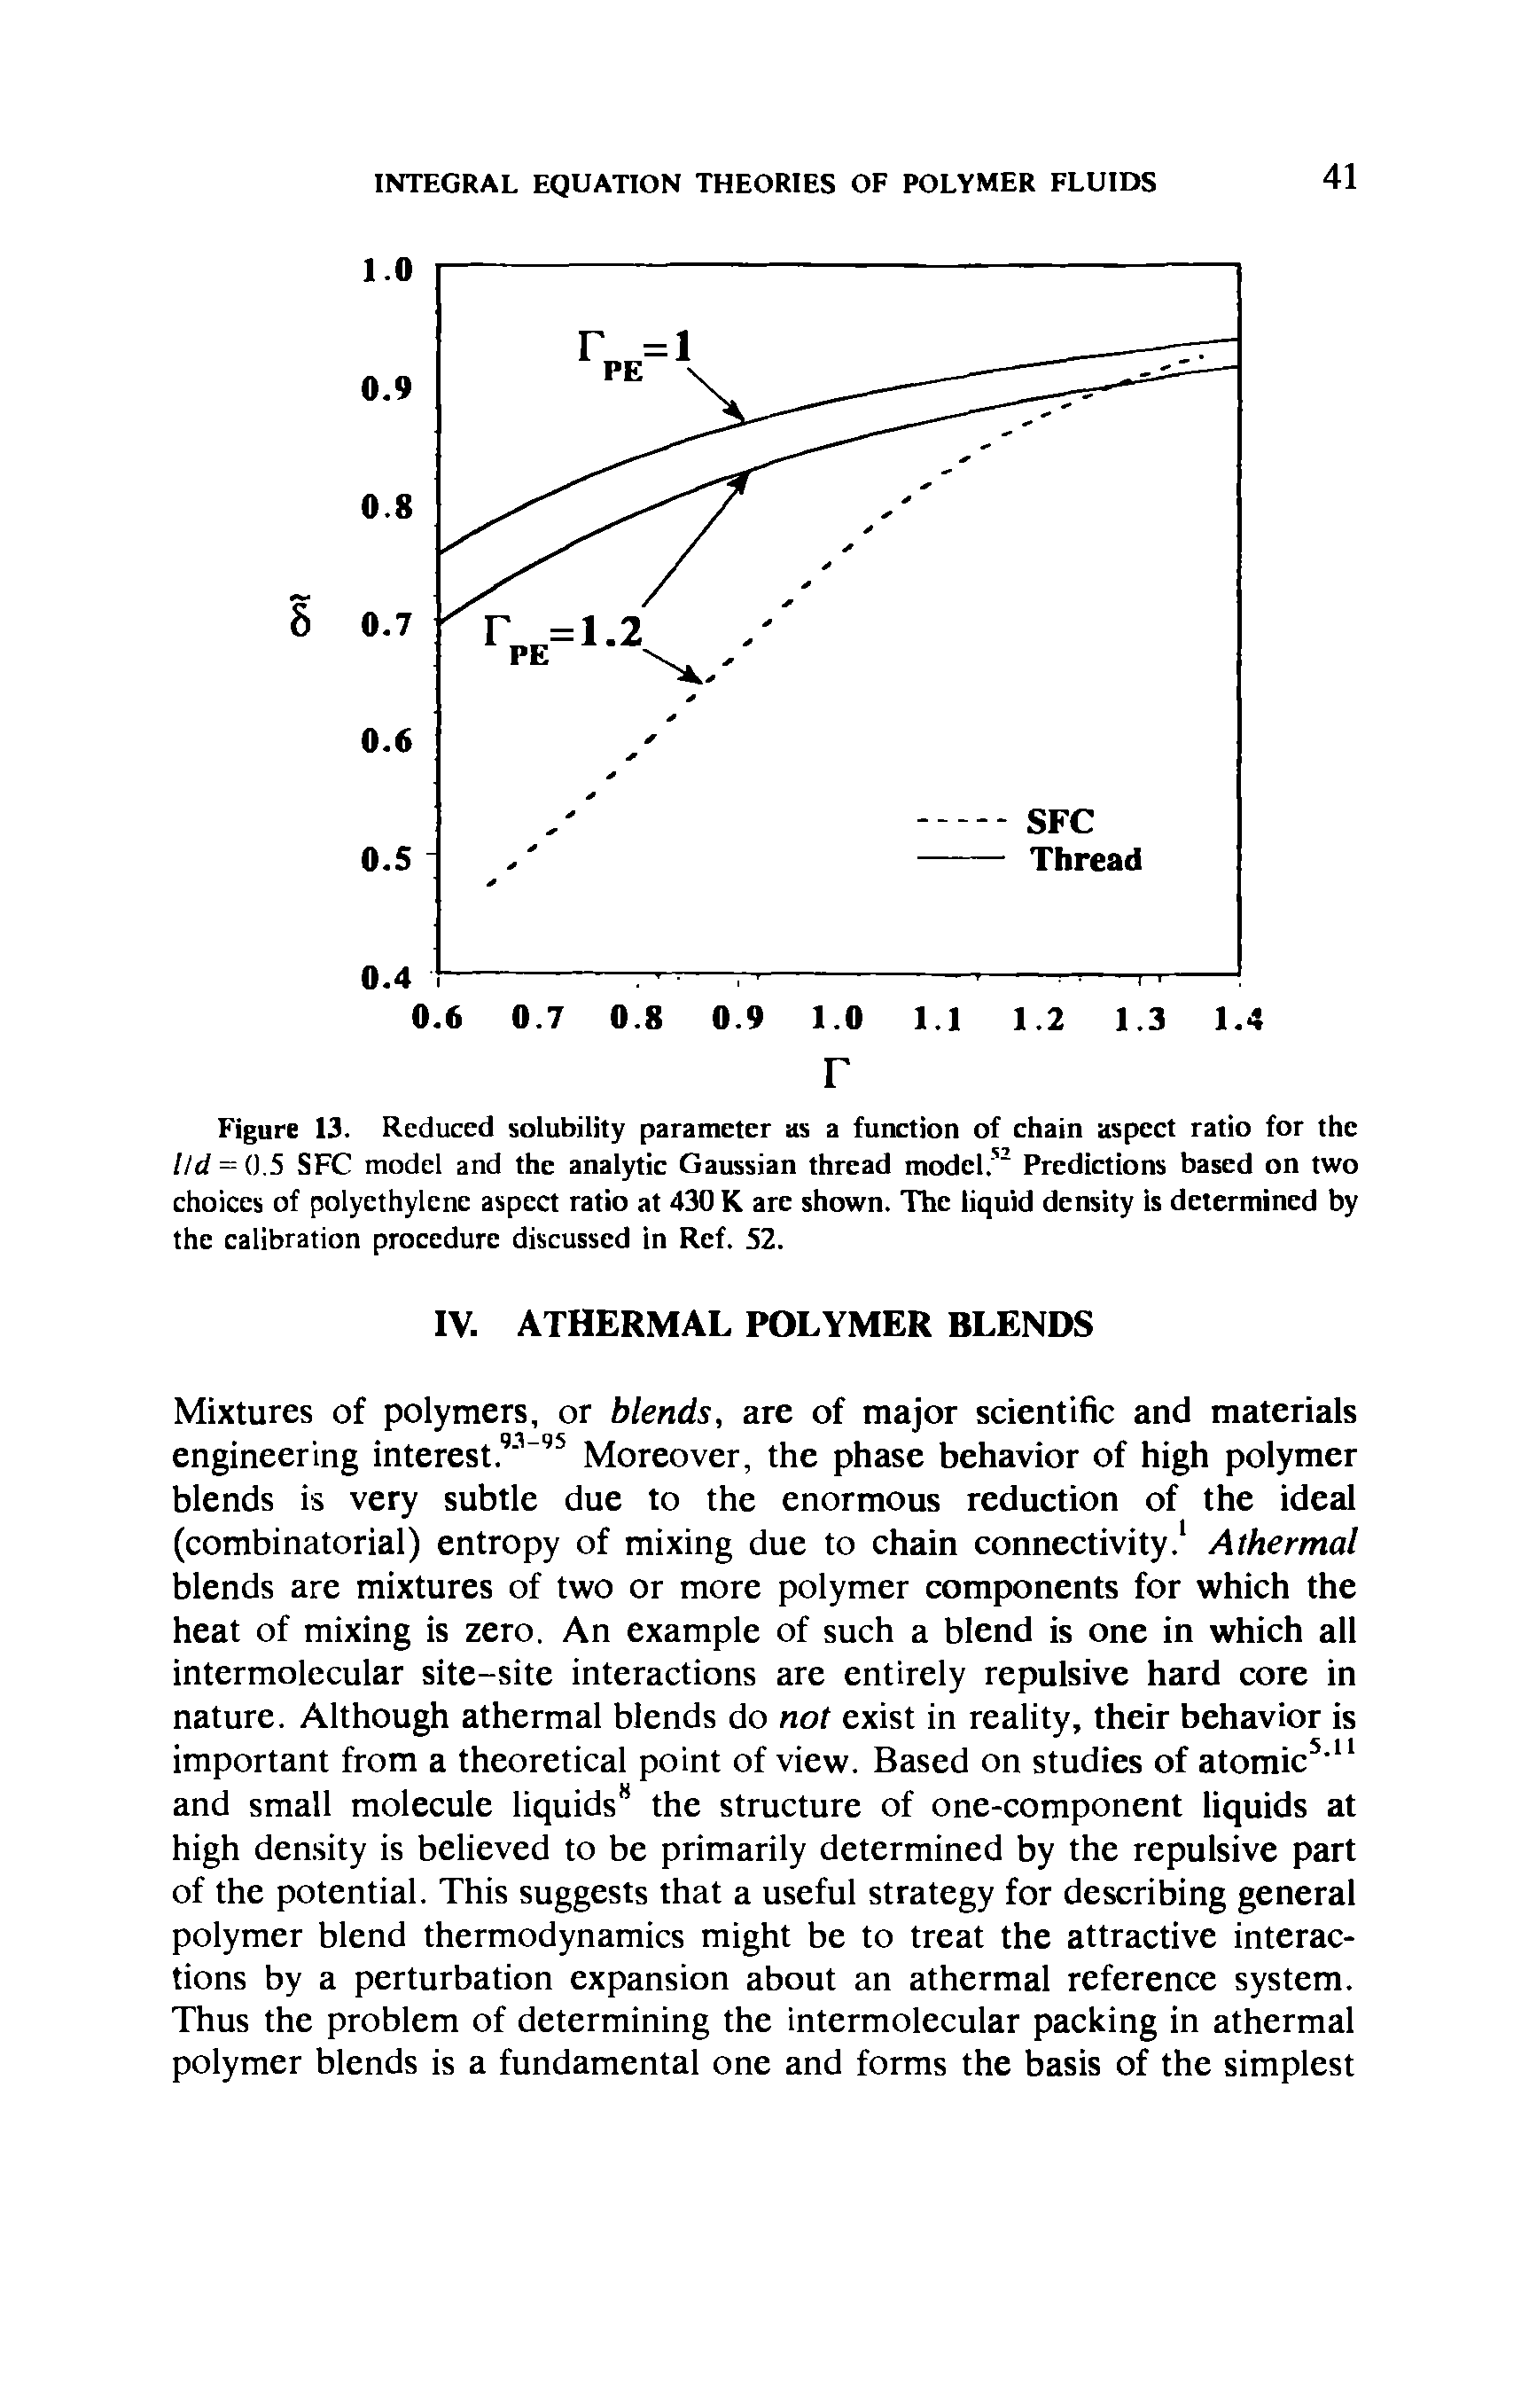 Figure 13. Reduced solubility parameter as a function of chain aspect ratio for the Ud = 0.5 SFC model and the analytic Gaussian thread model. Predictions based on two choices of polyethylene aspect ratio at 430 K arc shown. The liquid density is determined by the calibration procedure discussed in Ref. 52.